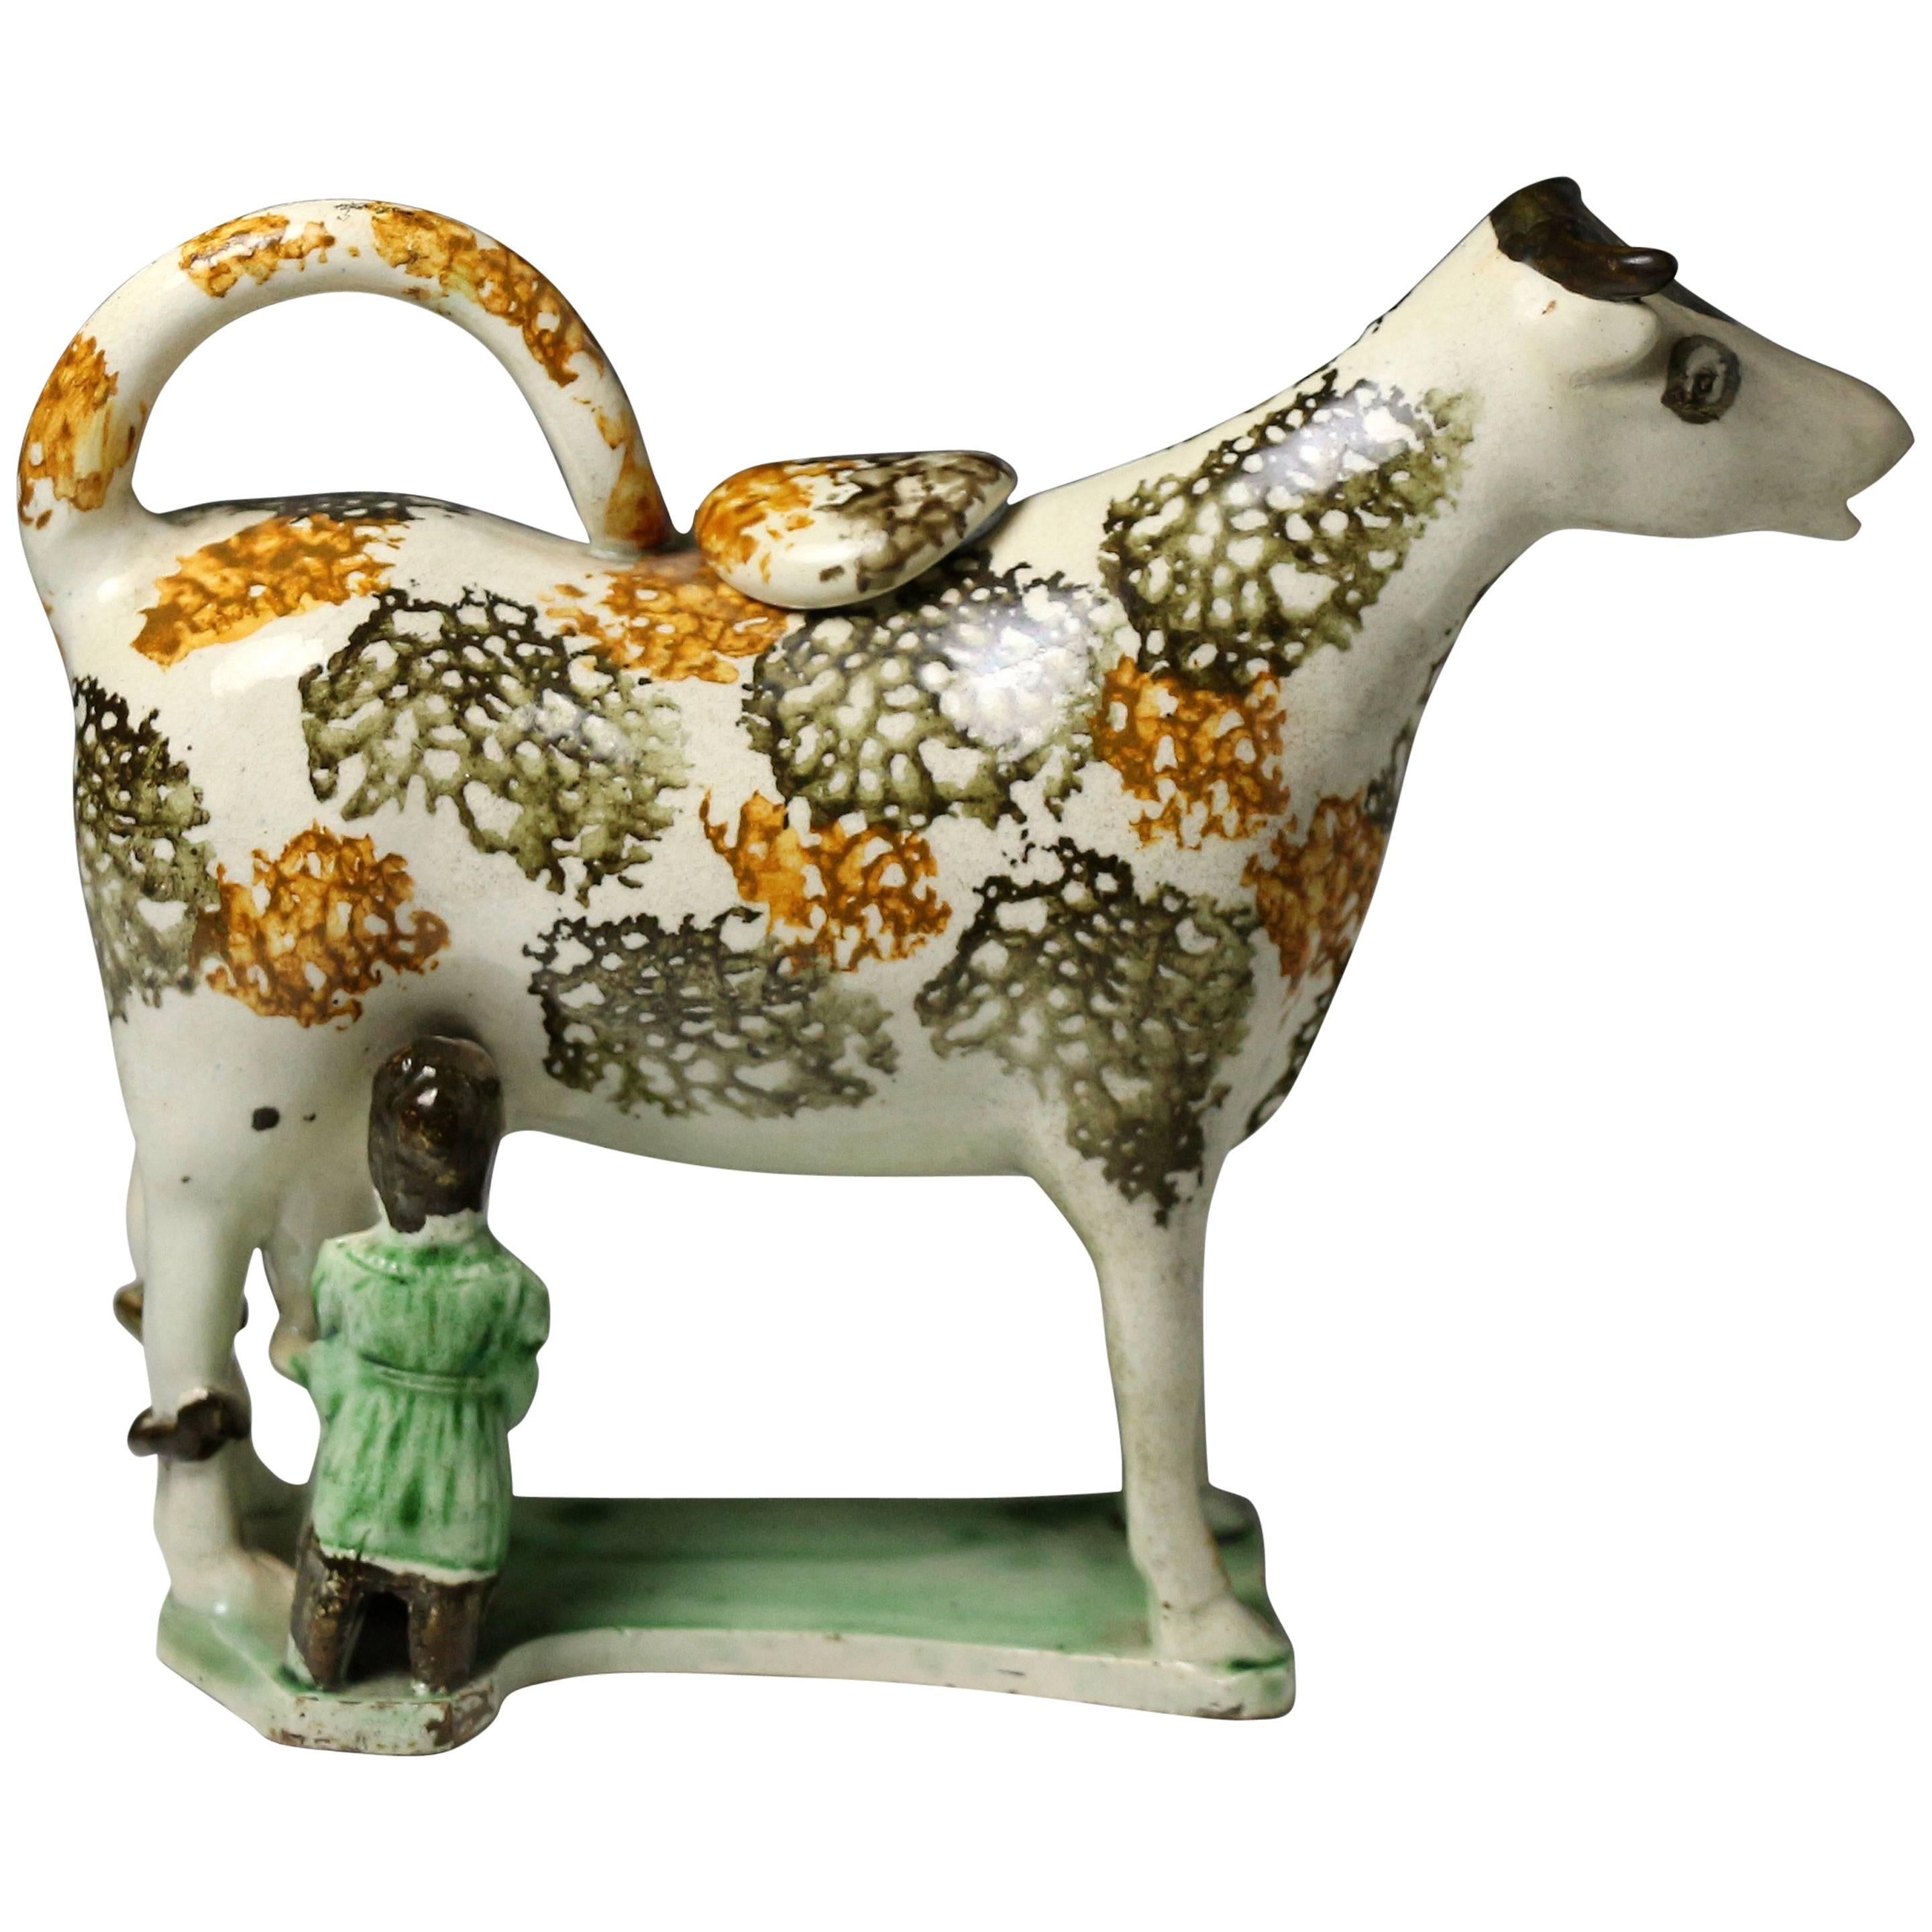 Antique Pearlware Pottery Figure of a Cow Creamer with Hobbled Legs